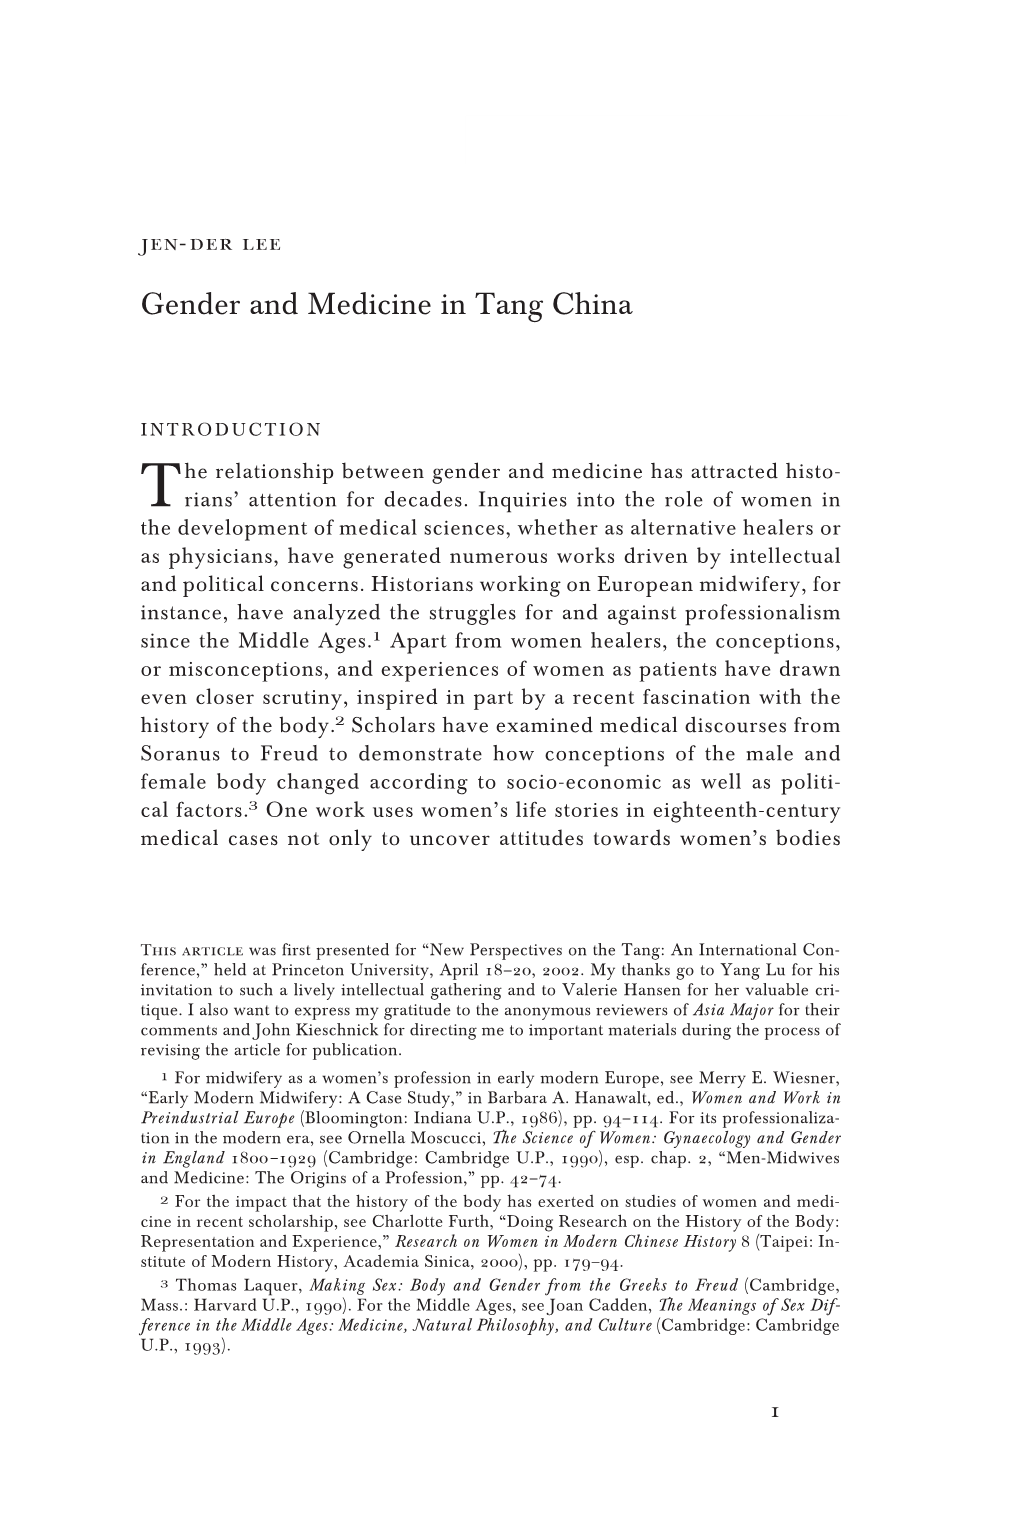 Gender and Medicine in Tang China